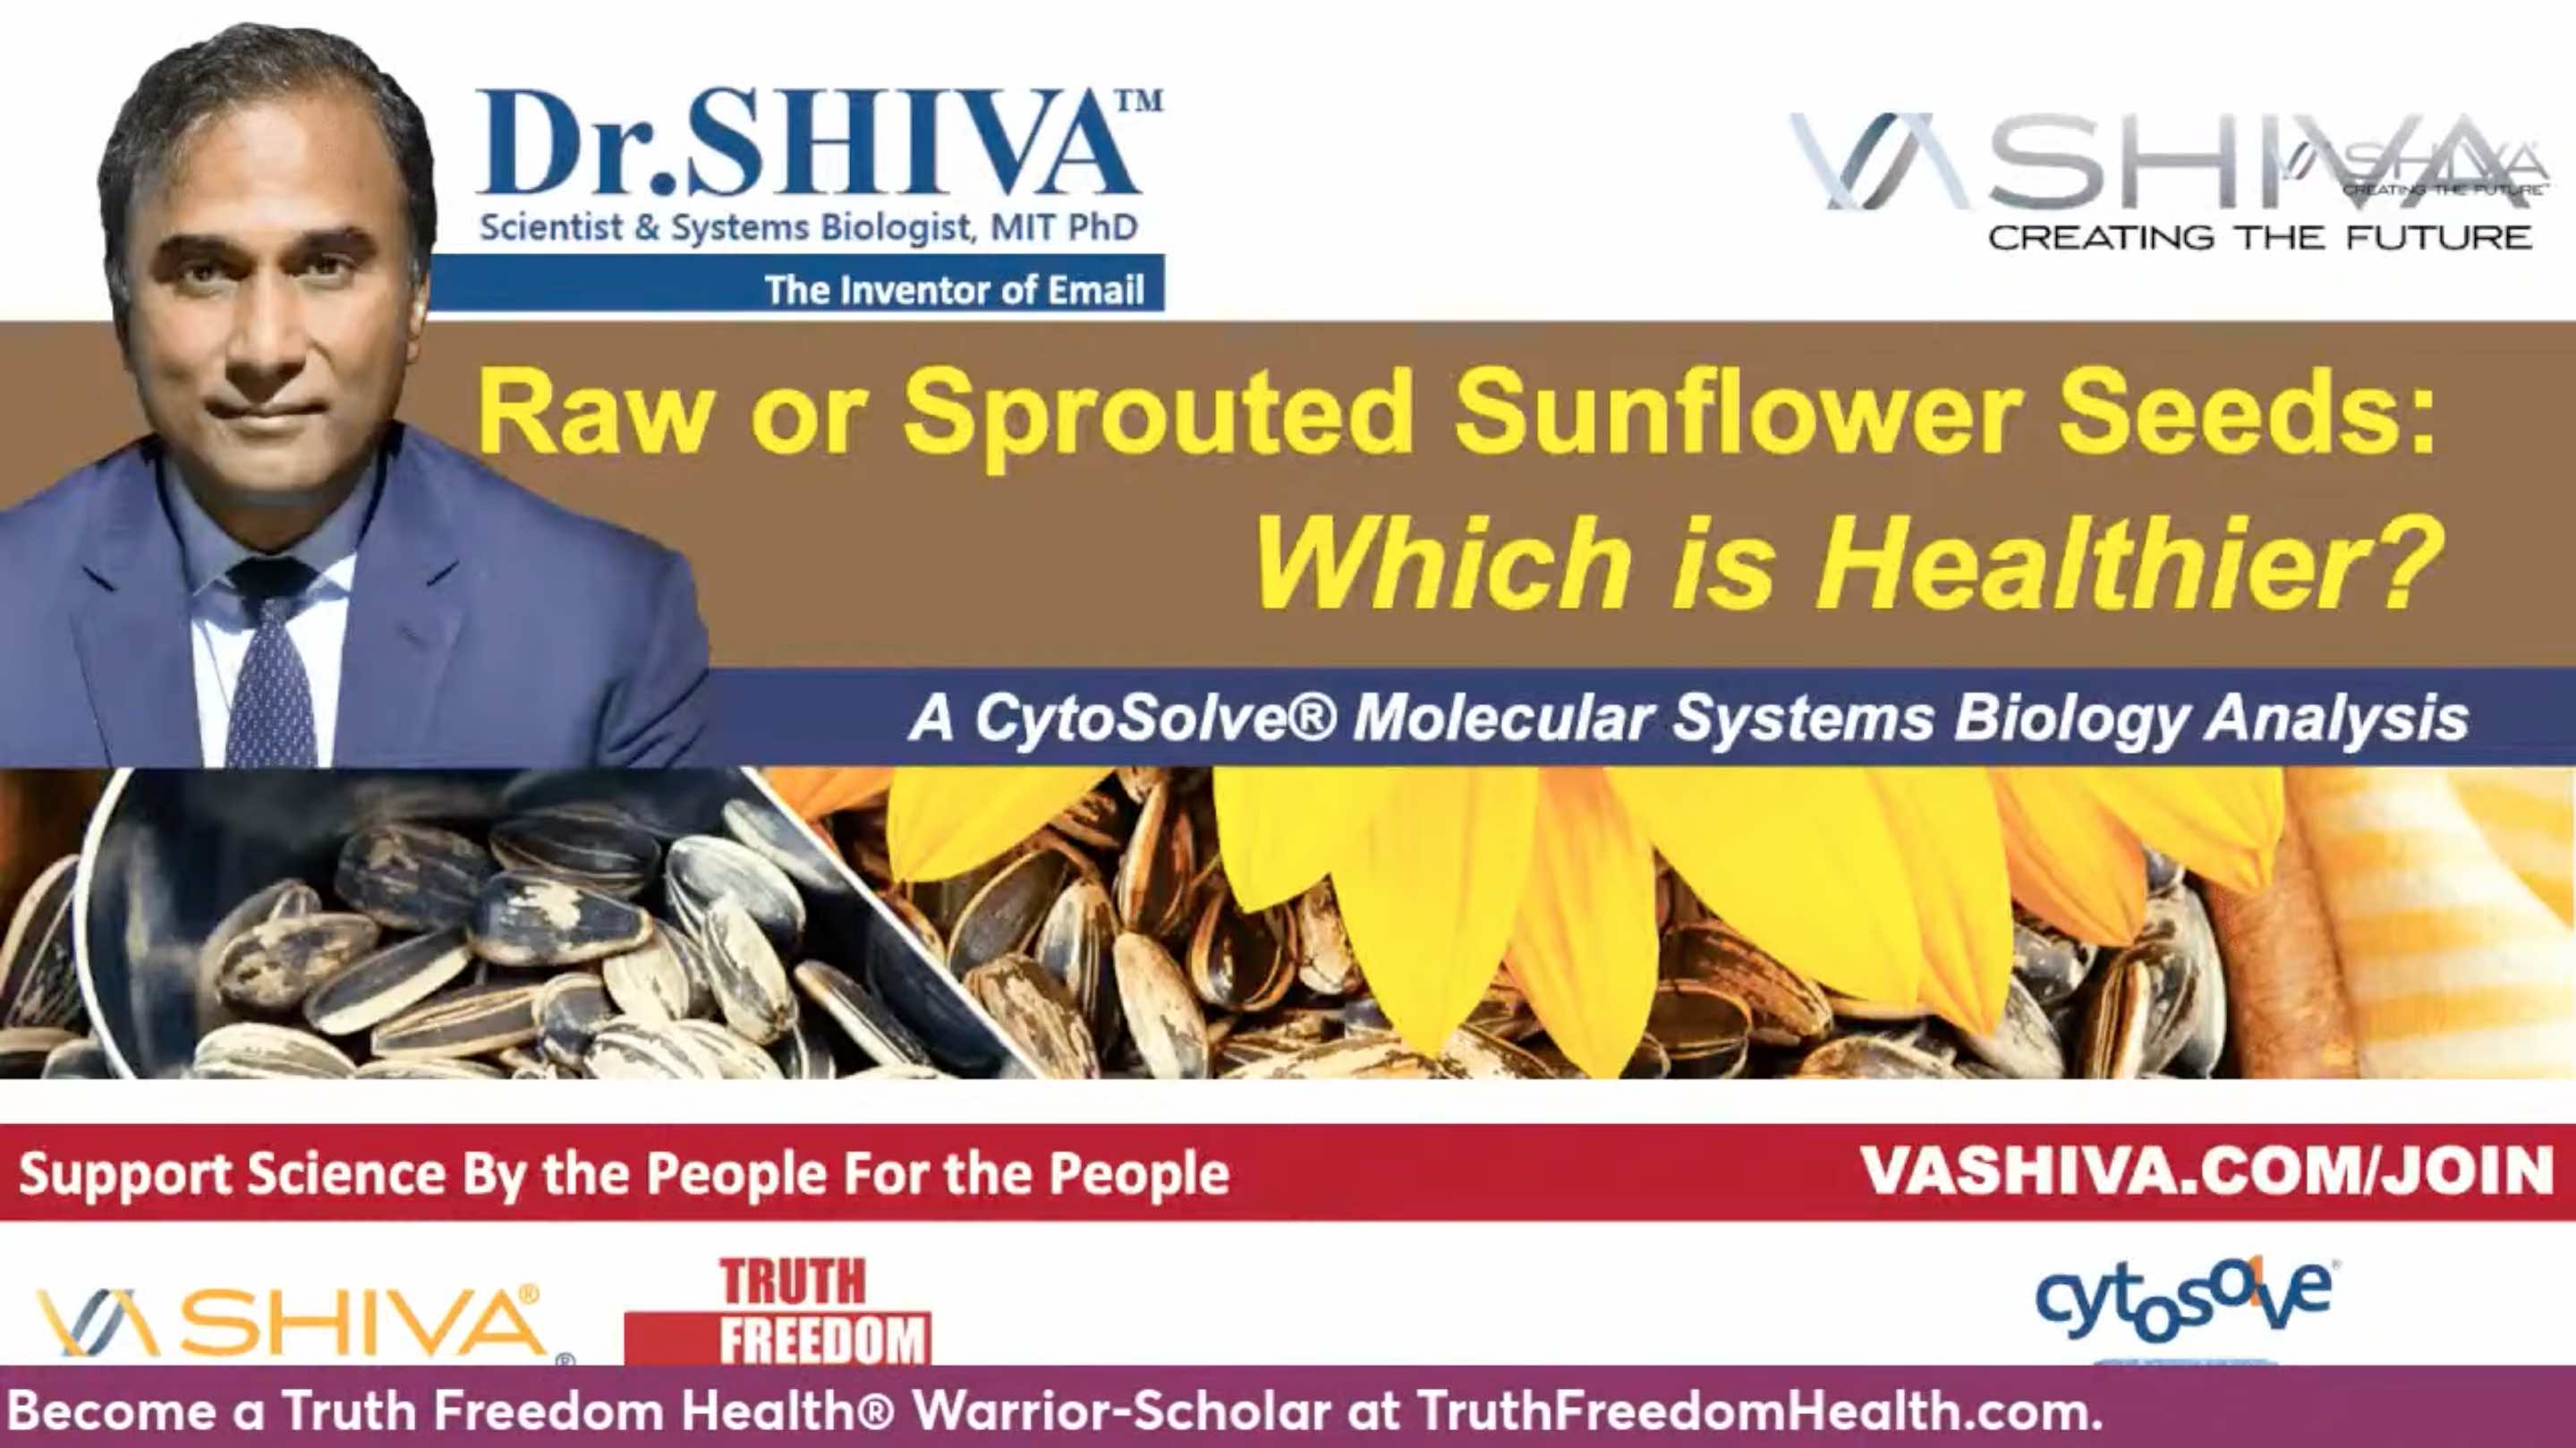 Dr.SHIVA LIVE: Raw or Sprouted Sun Flower Seeds - Which Is Healthier?